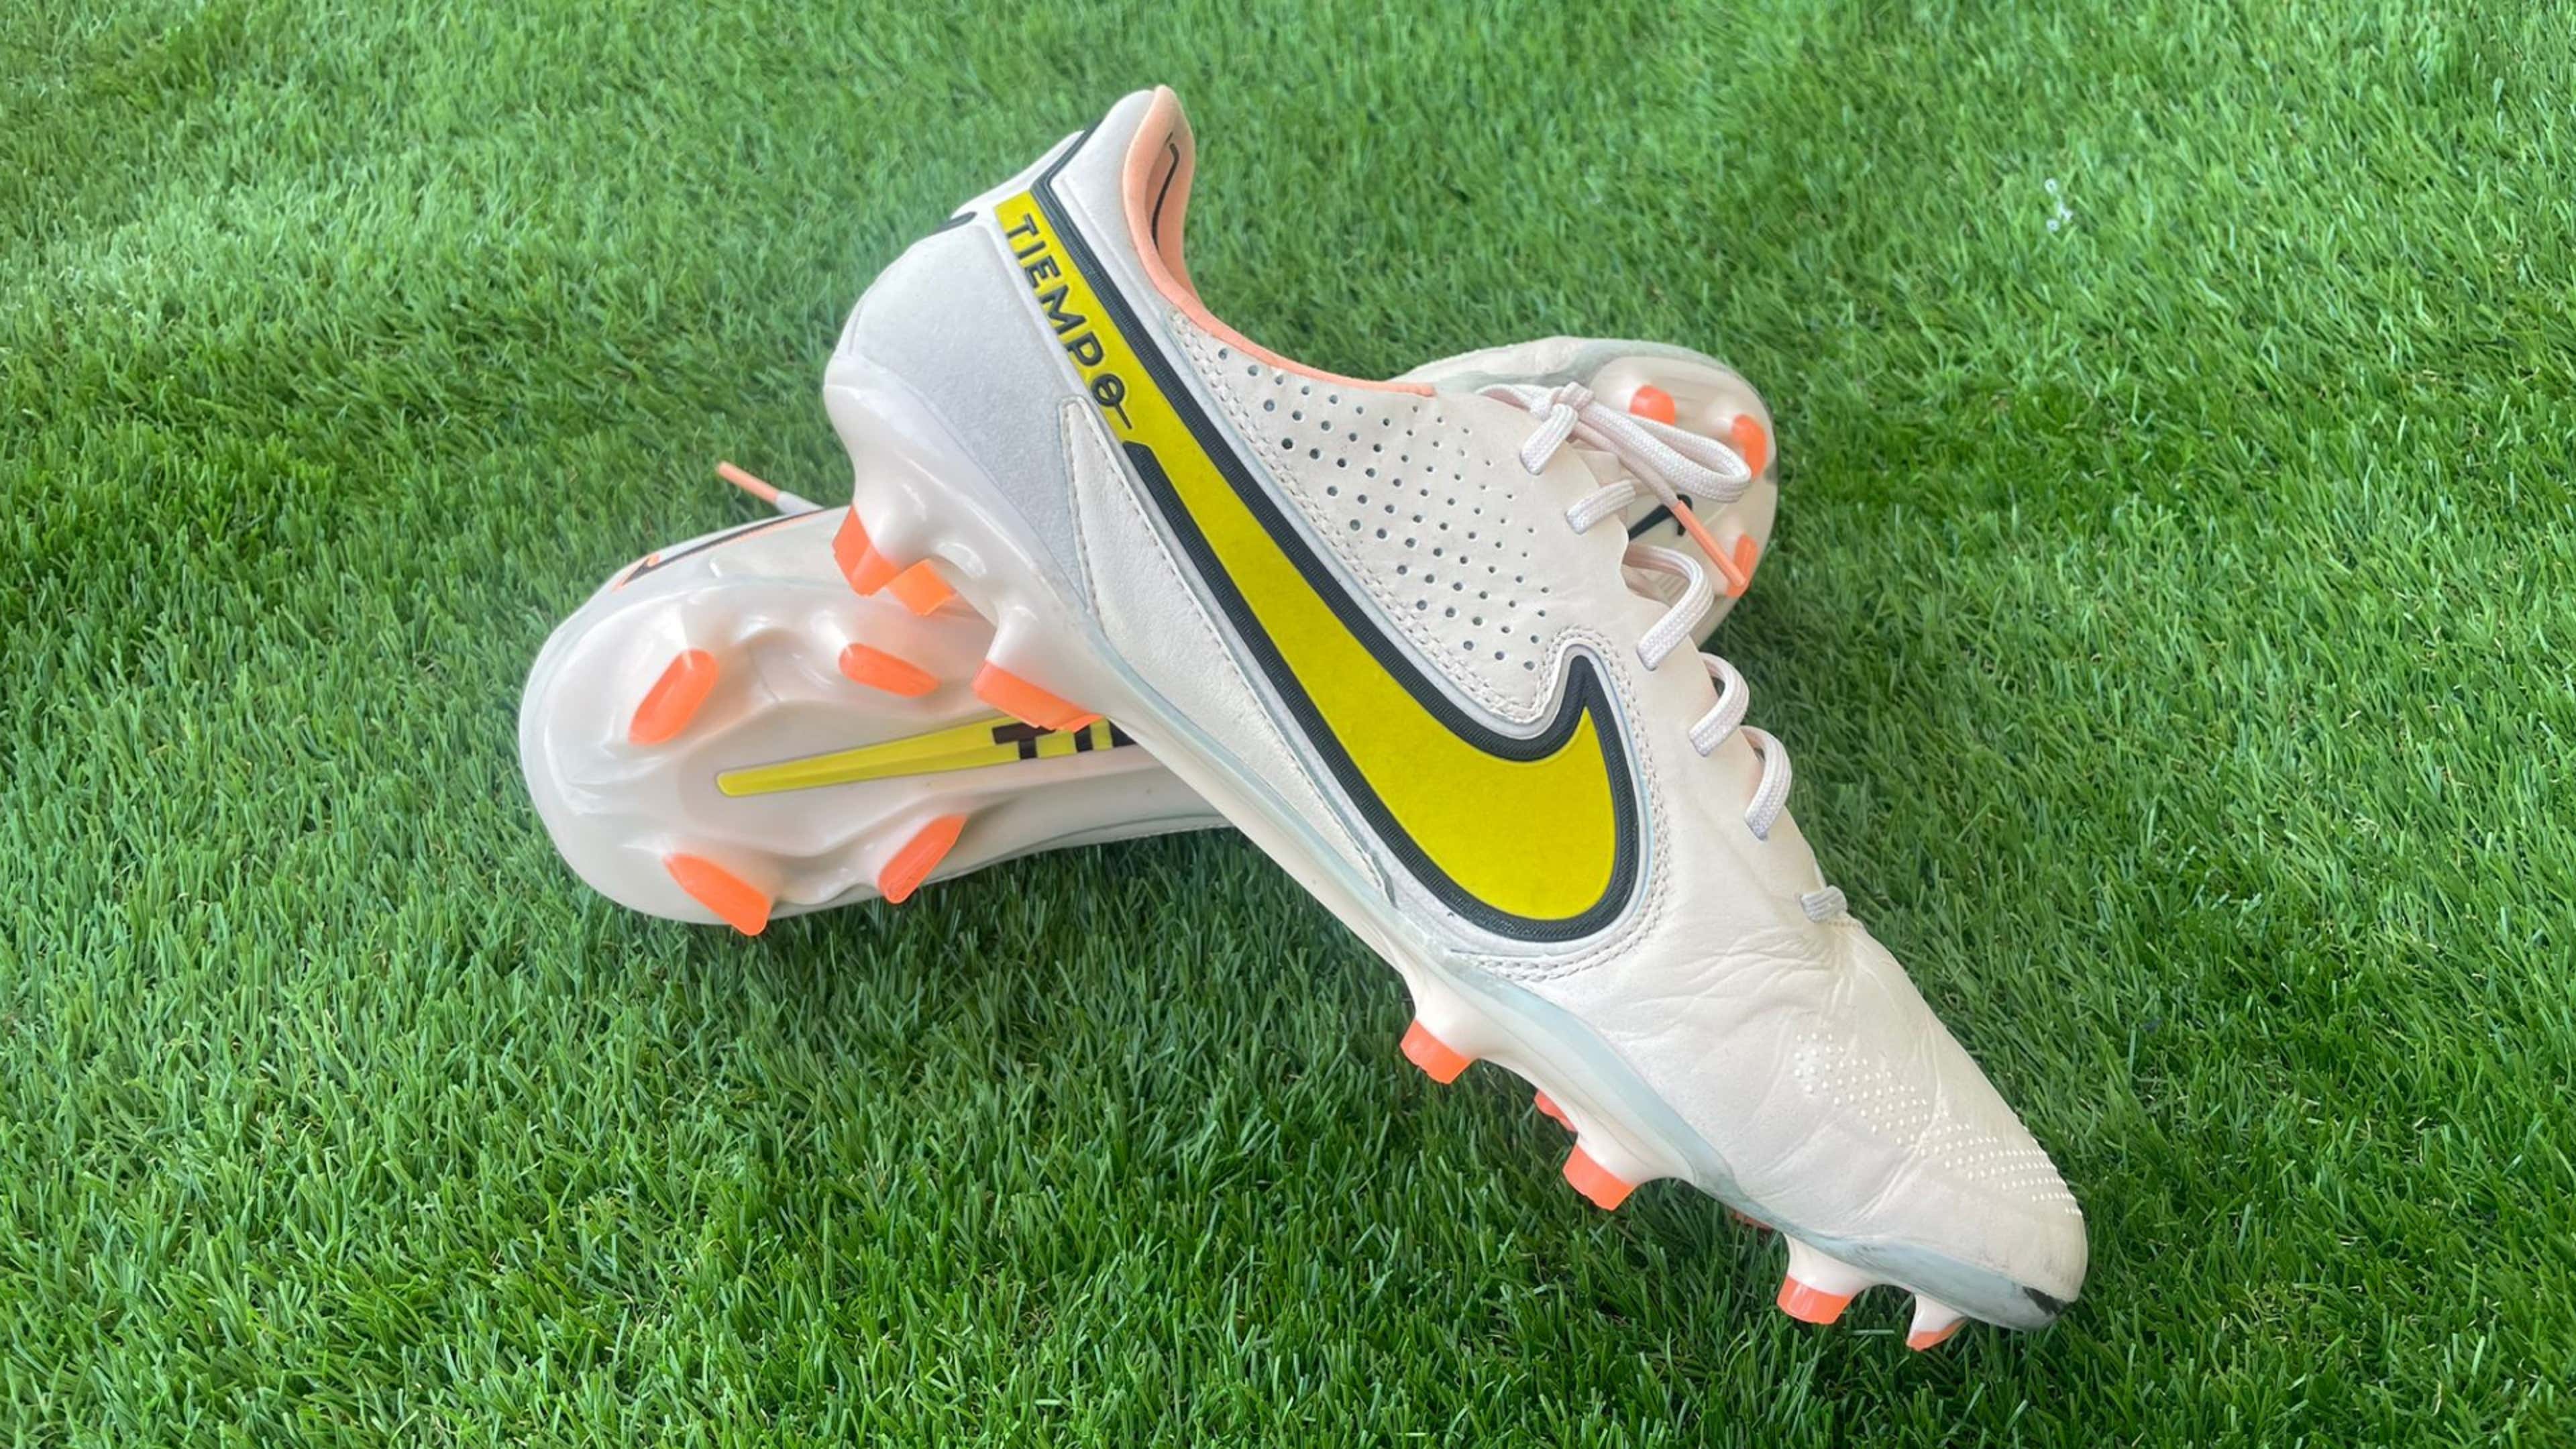 Elektricien Voorouder academisch Nike Tiempo Legend Elite FG Boots: Our tried & tested review | Goal.com US